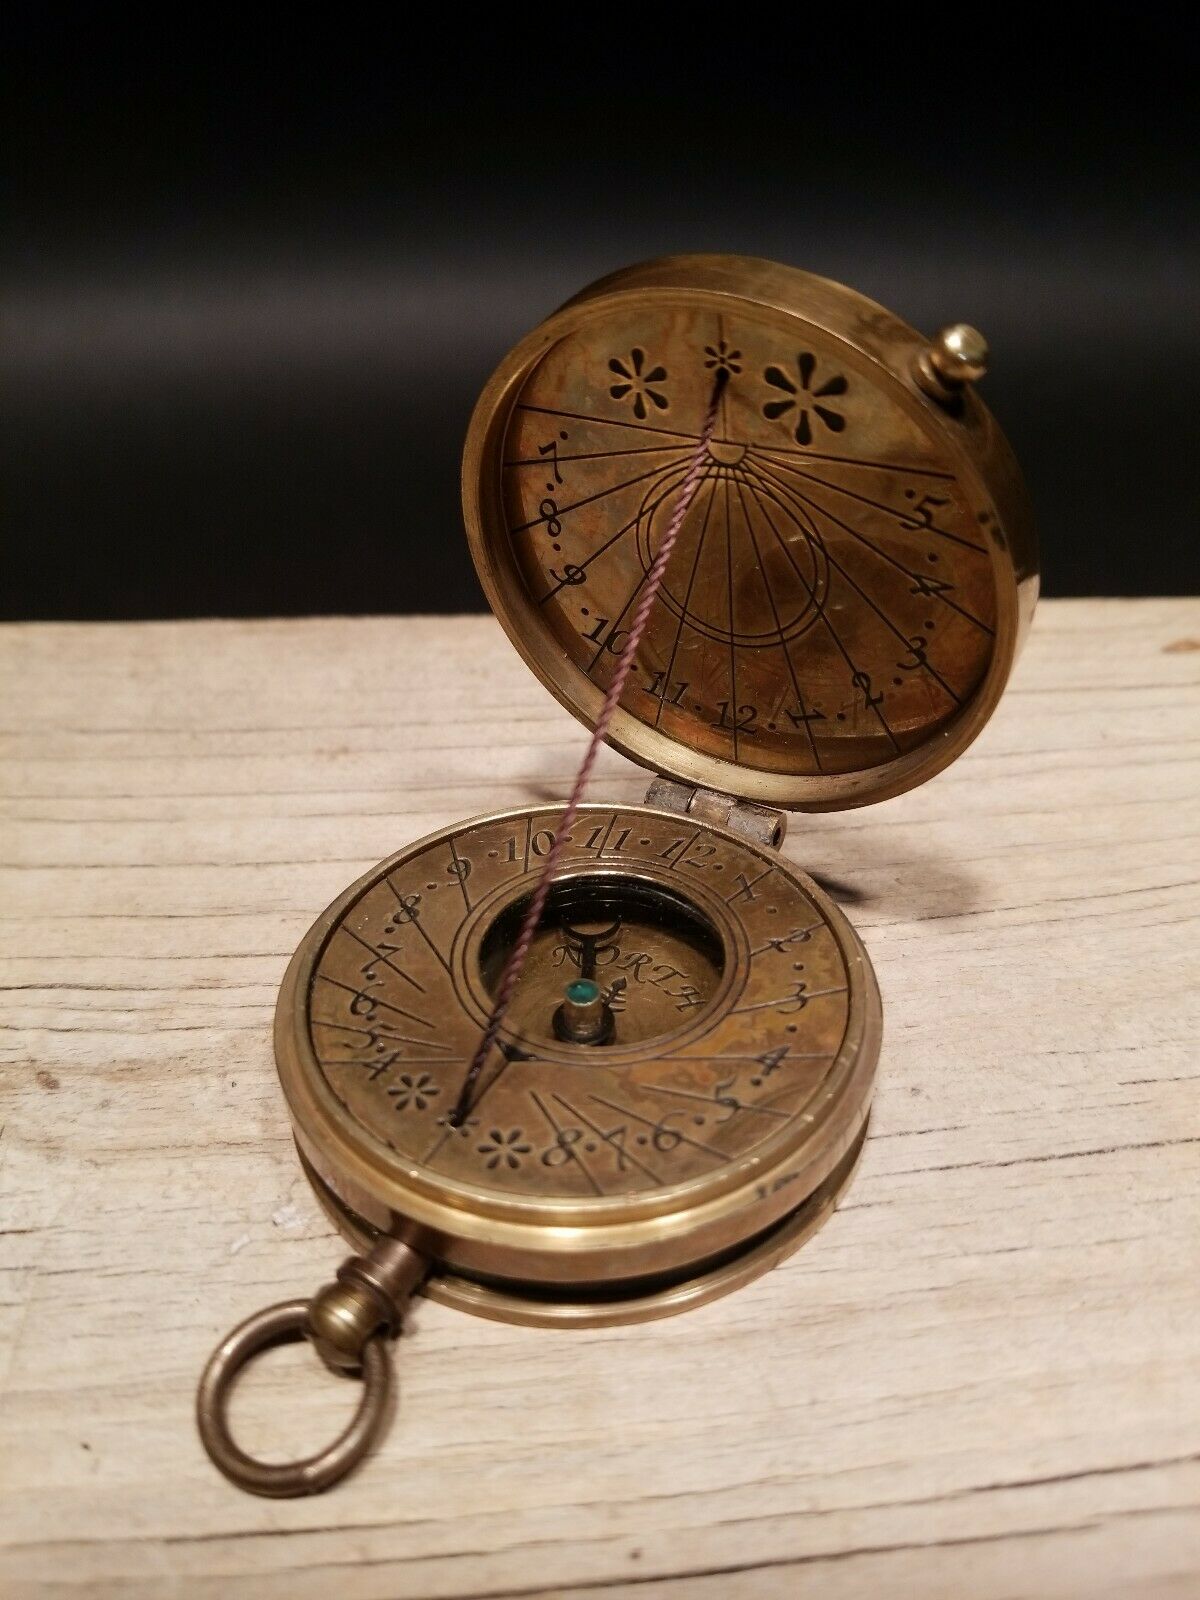 Vintage Antique Style Sundial Compass – Early Home Decor